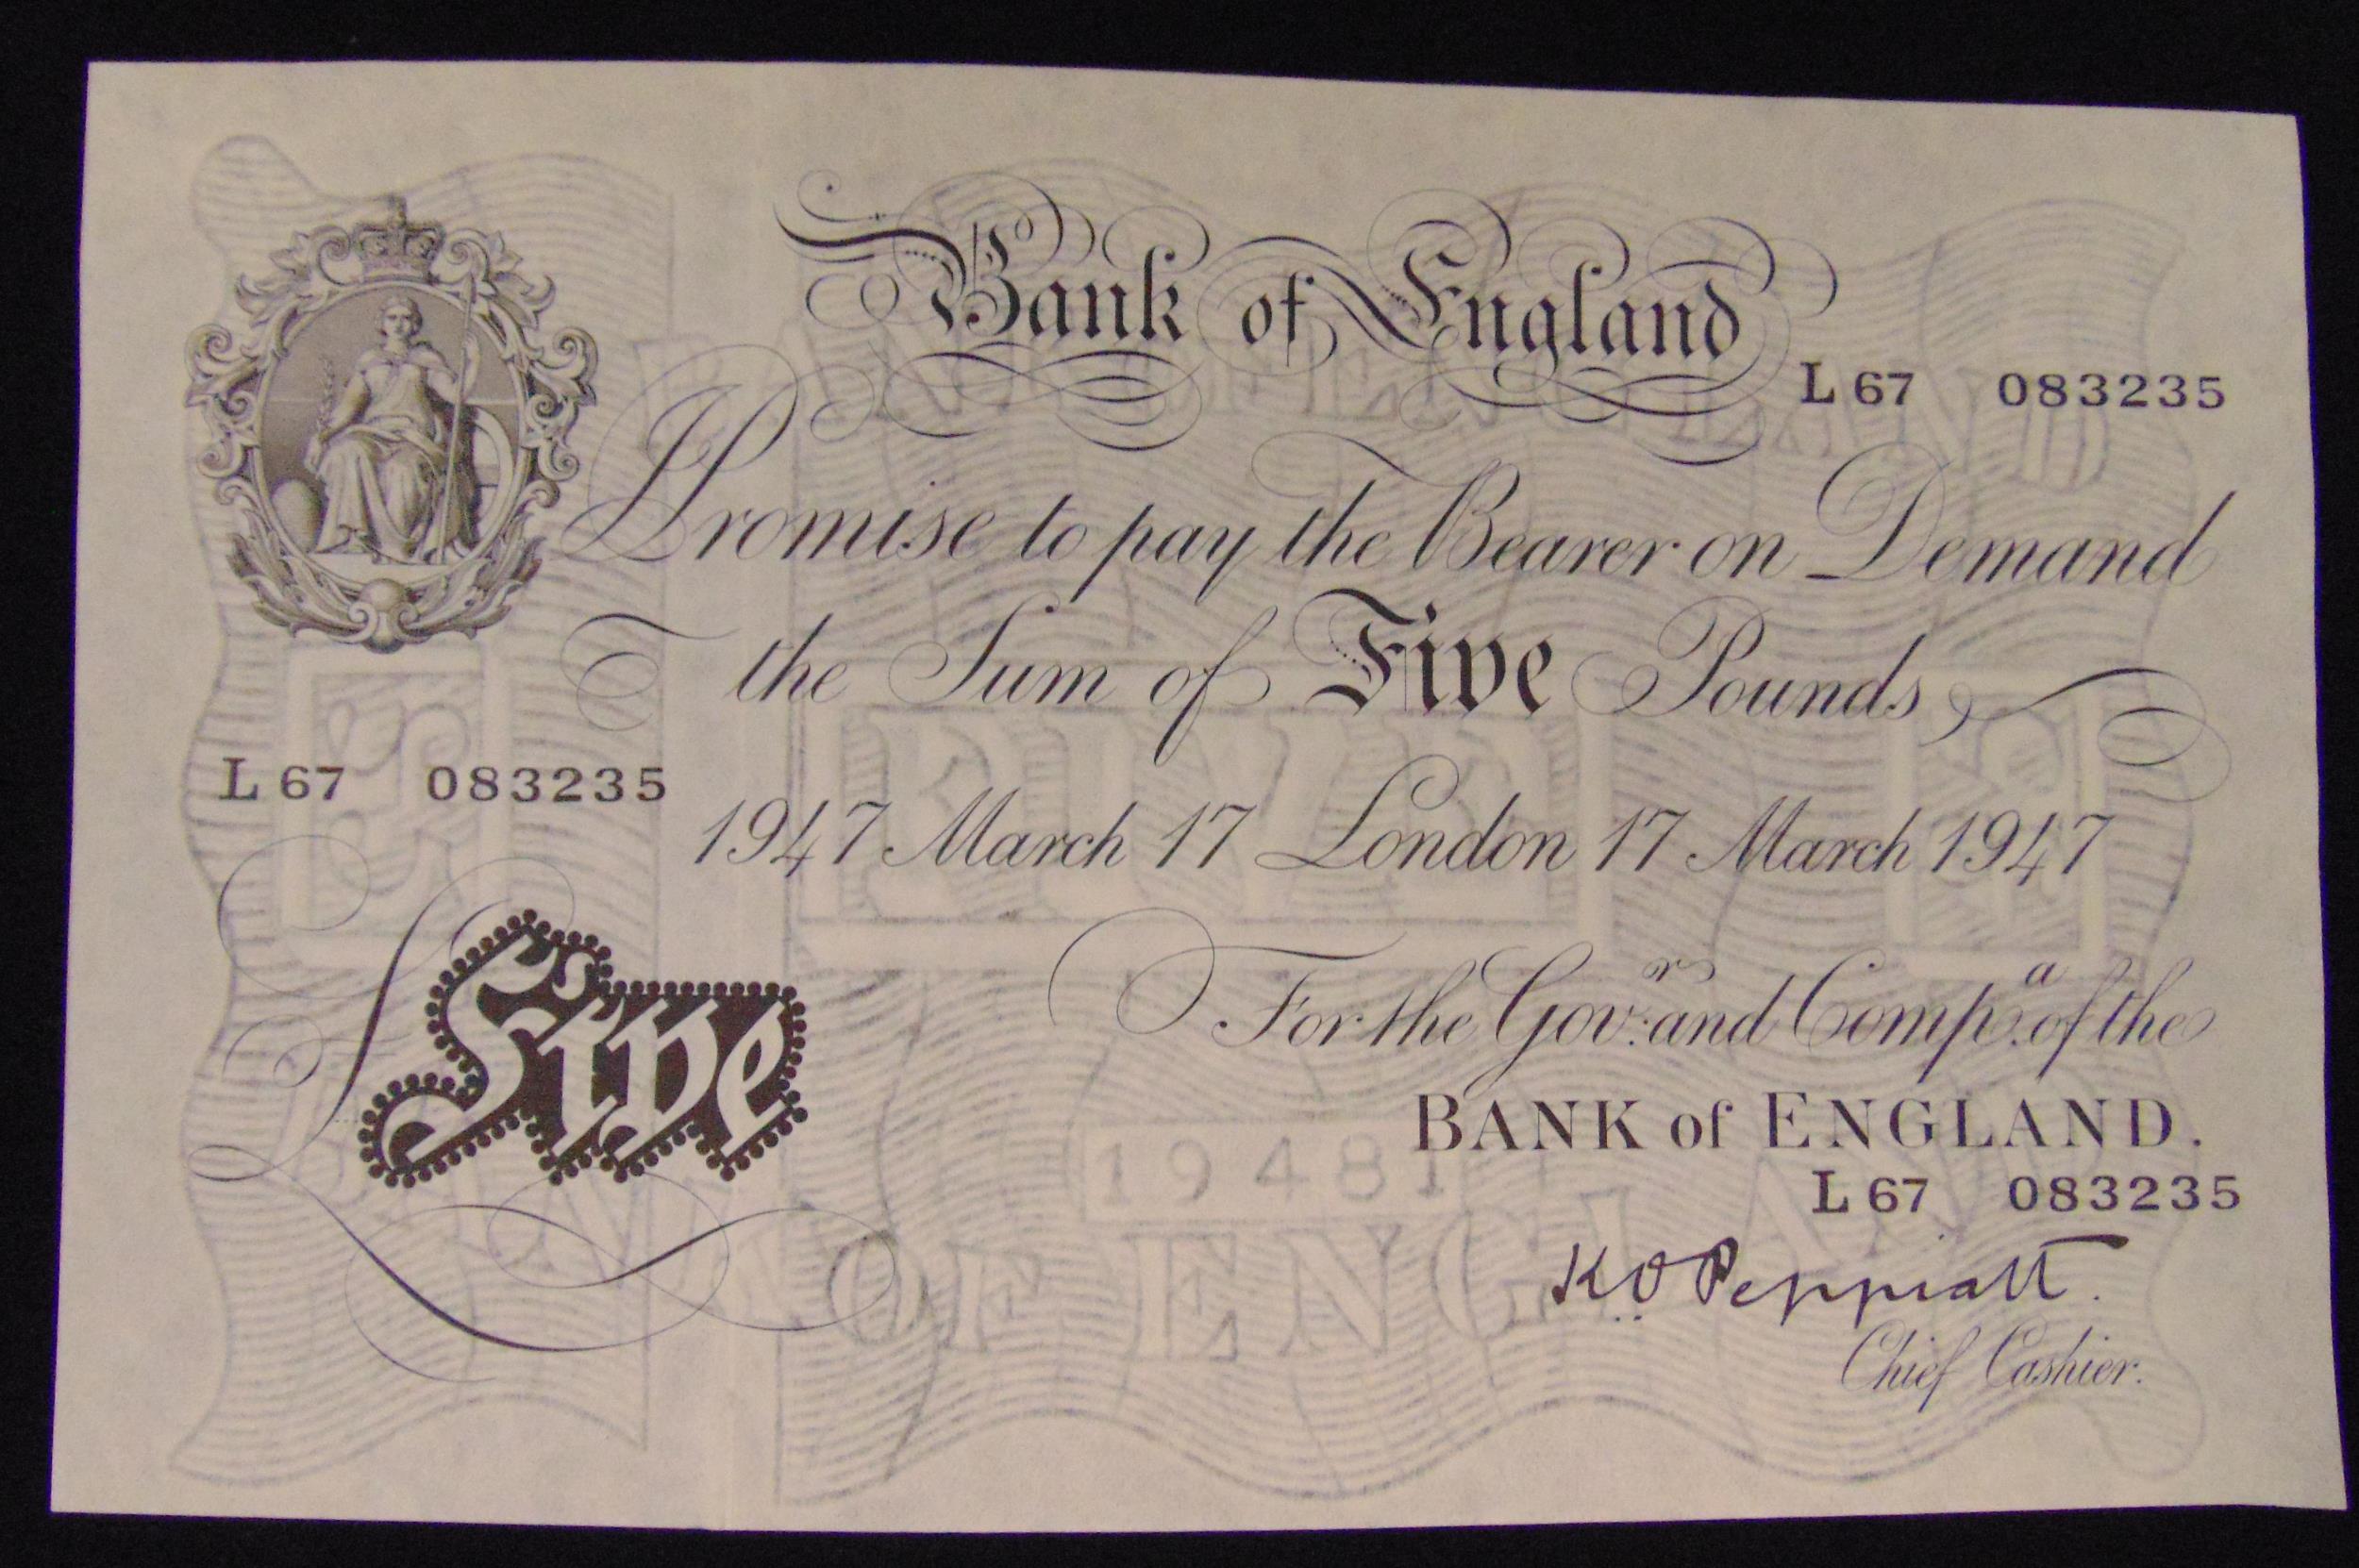 Bank of England £5 Peppiatt white bank note dated 17th March 1947 serial no. L67 083235